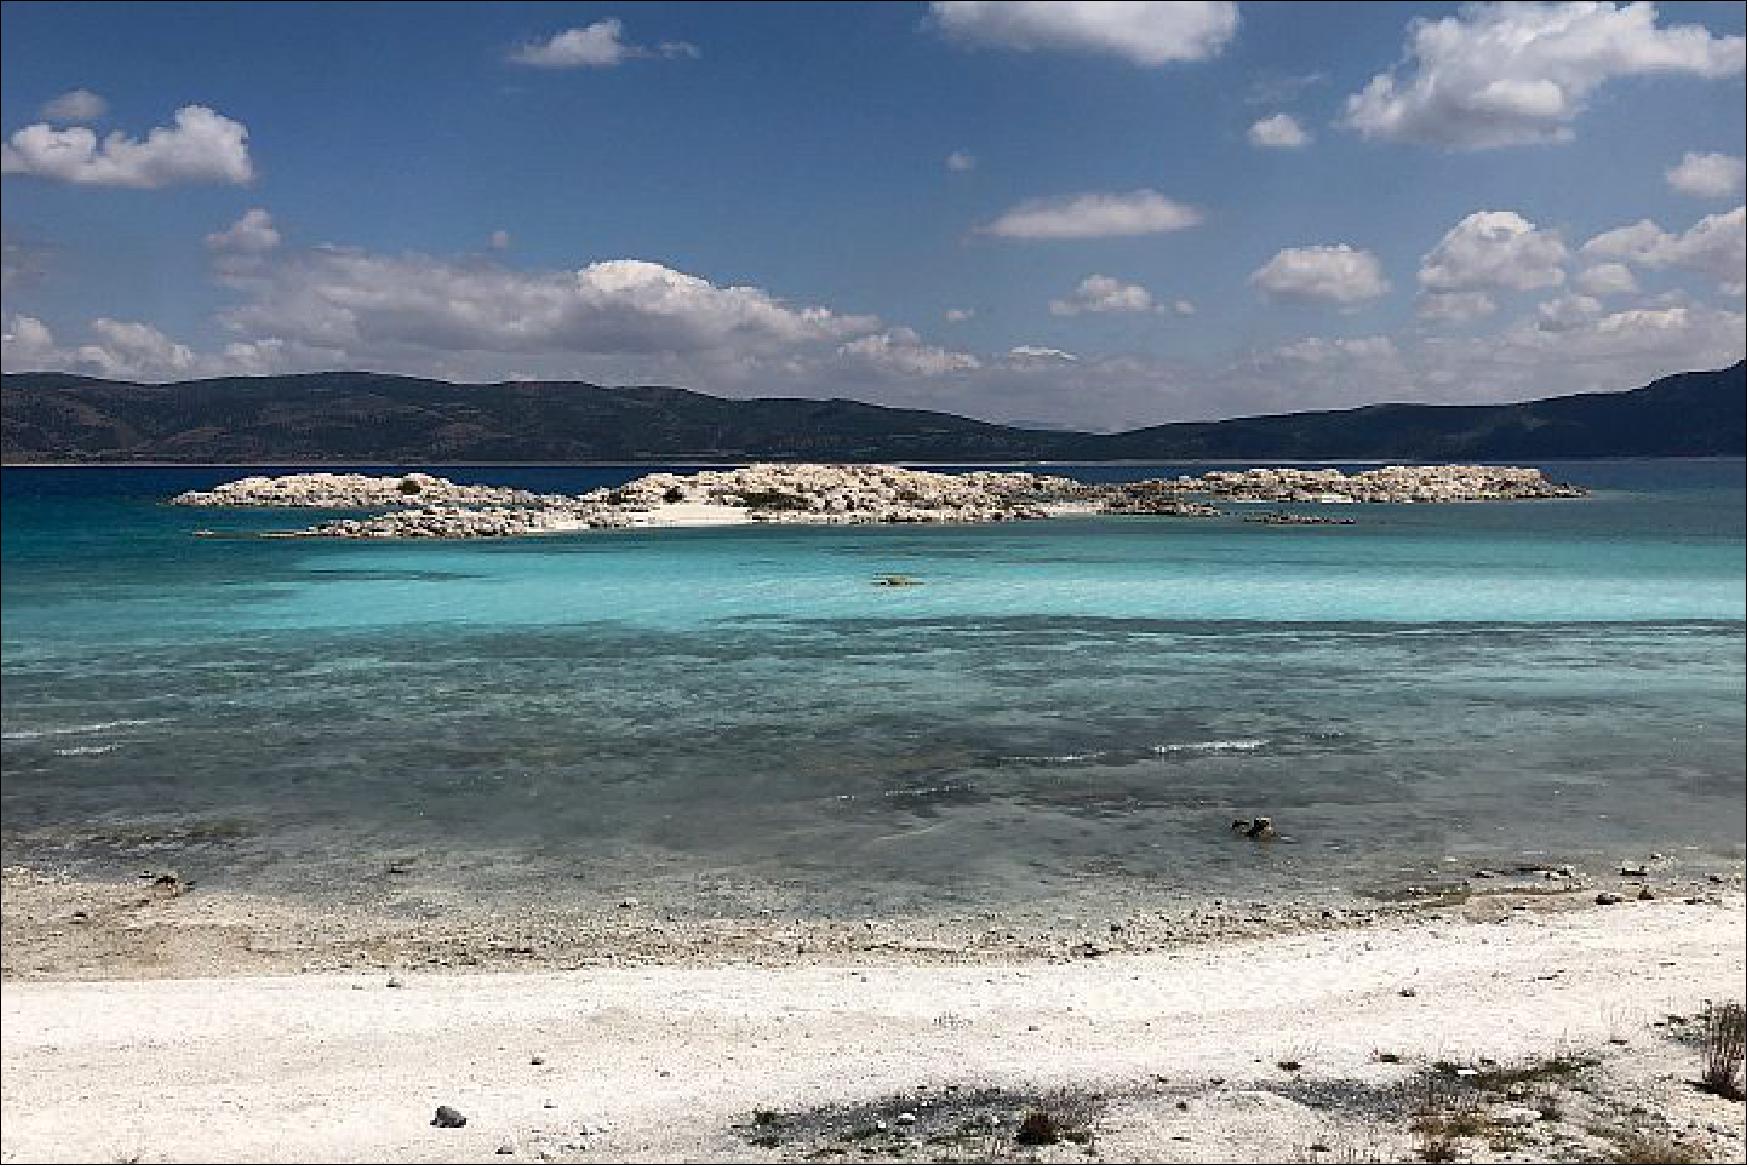 Figure 61: In August 2019, Garczynski took this photo of an exposed microbialite island on Lake Salda. Collaborating with colleagues at the Istanbul Technical University, the Purdue research team spent almost a week surveying the lake’s perimeter and surrounding area. Garczynski said these islands are expected to erode over time and will eventually be transported, reworked, and deposited as beach sediments along the shoreline (photo credit: Garczynski, B. J, et al. (2020))